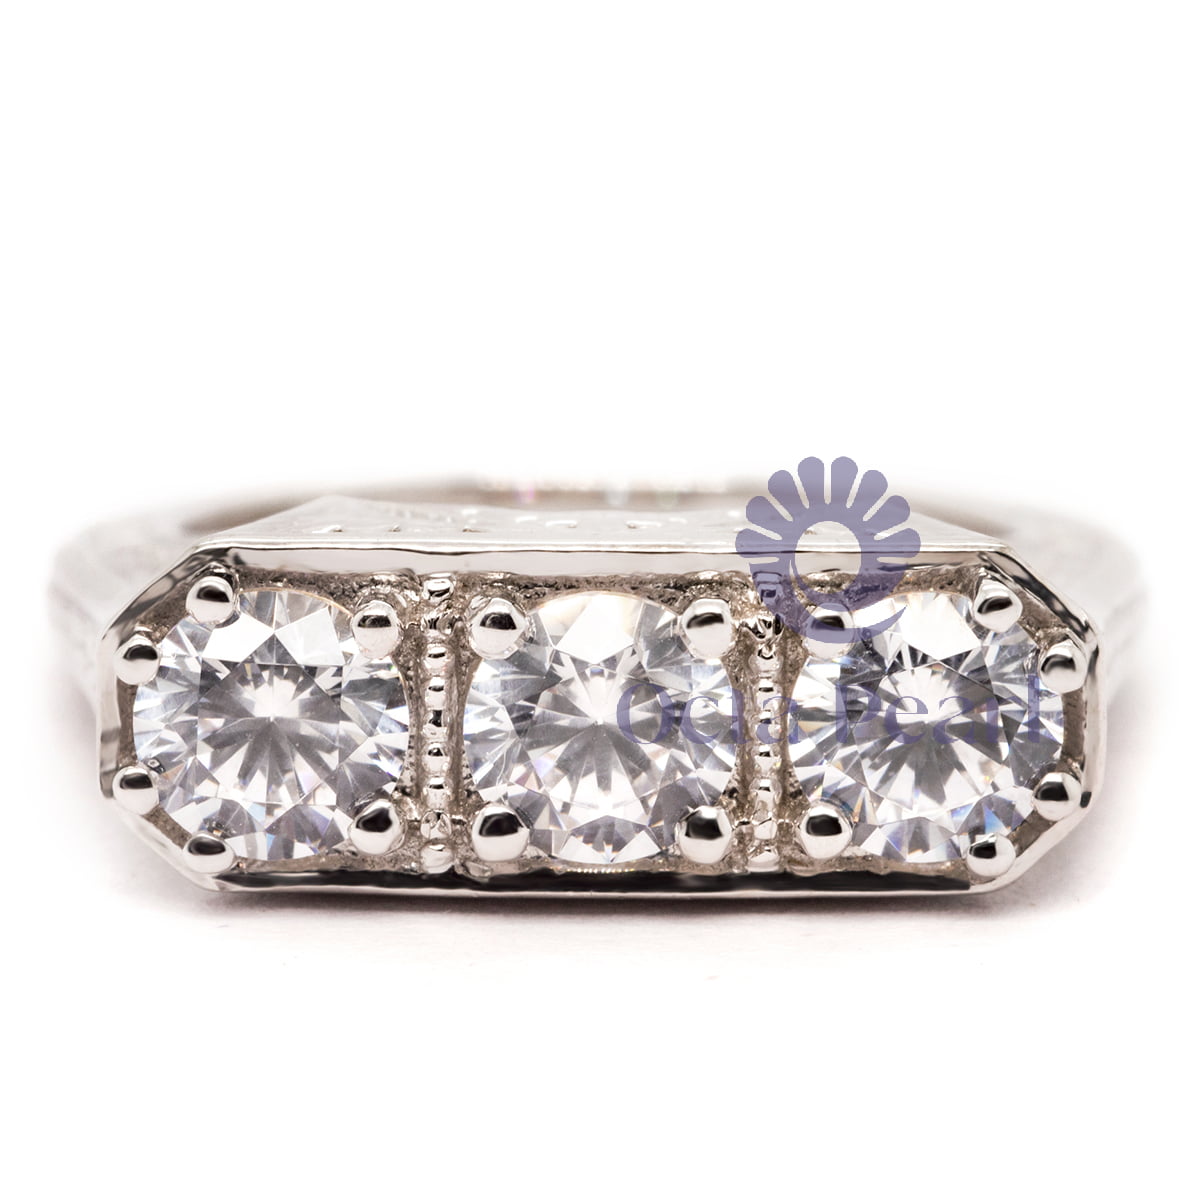 Art Deco inspired Vintage Engagement Ring with three Round Cut Moissanite